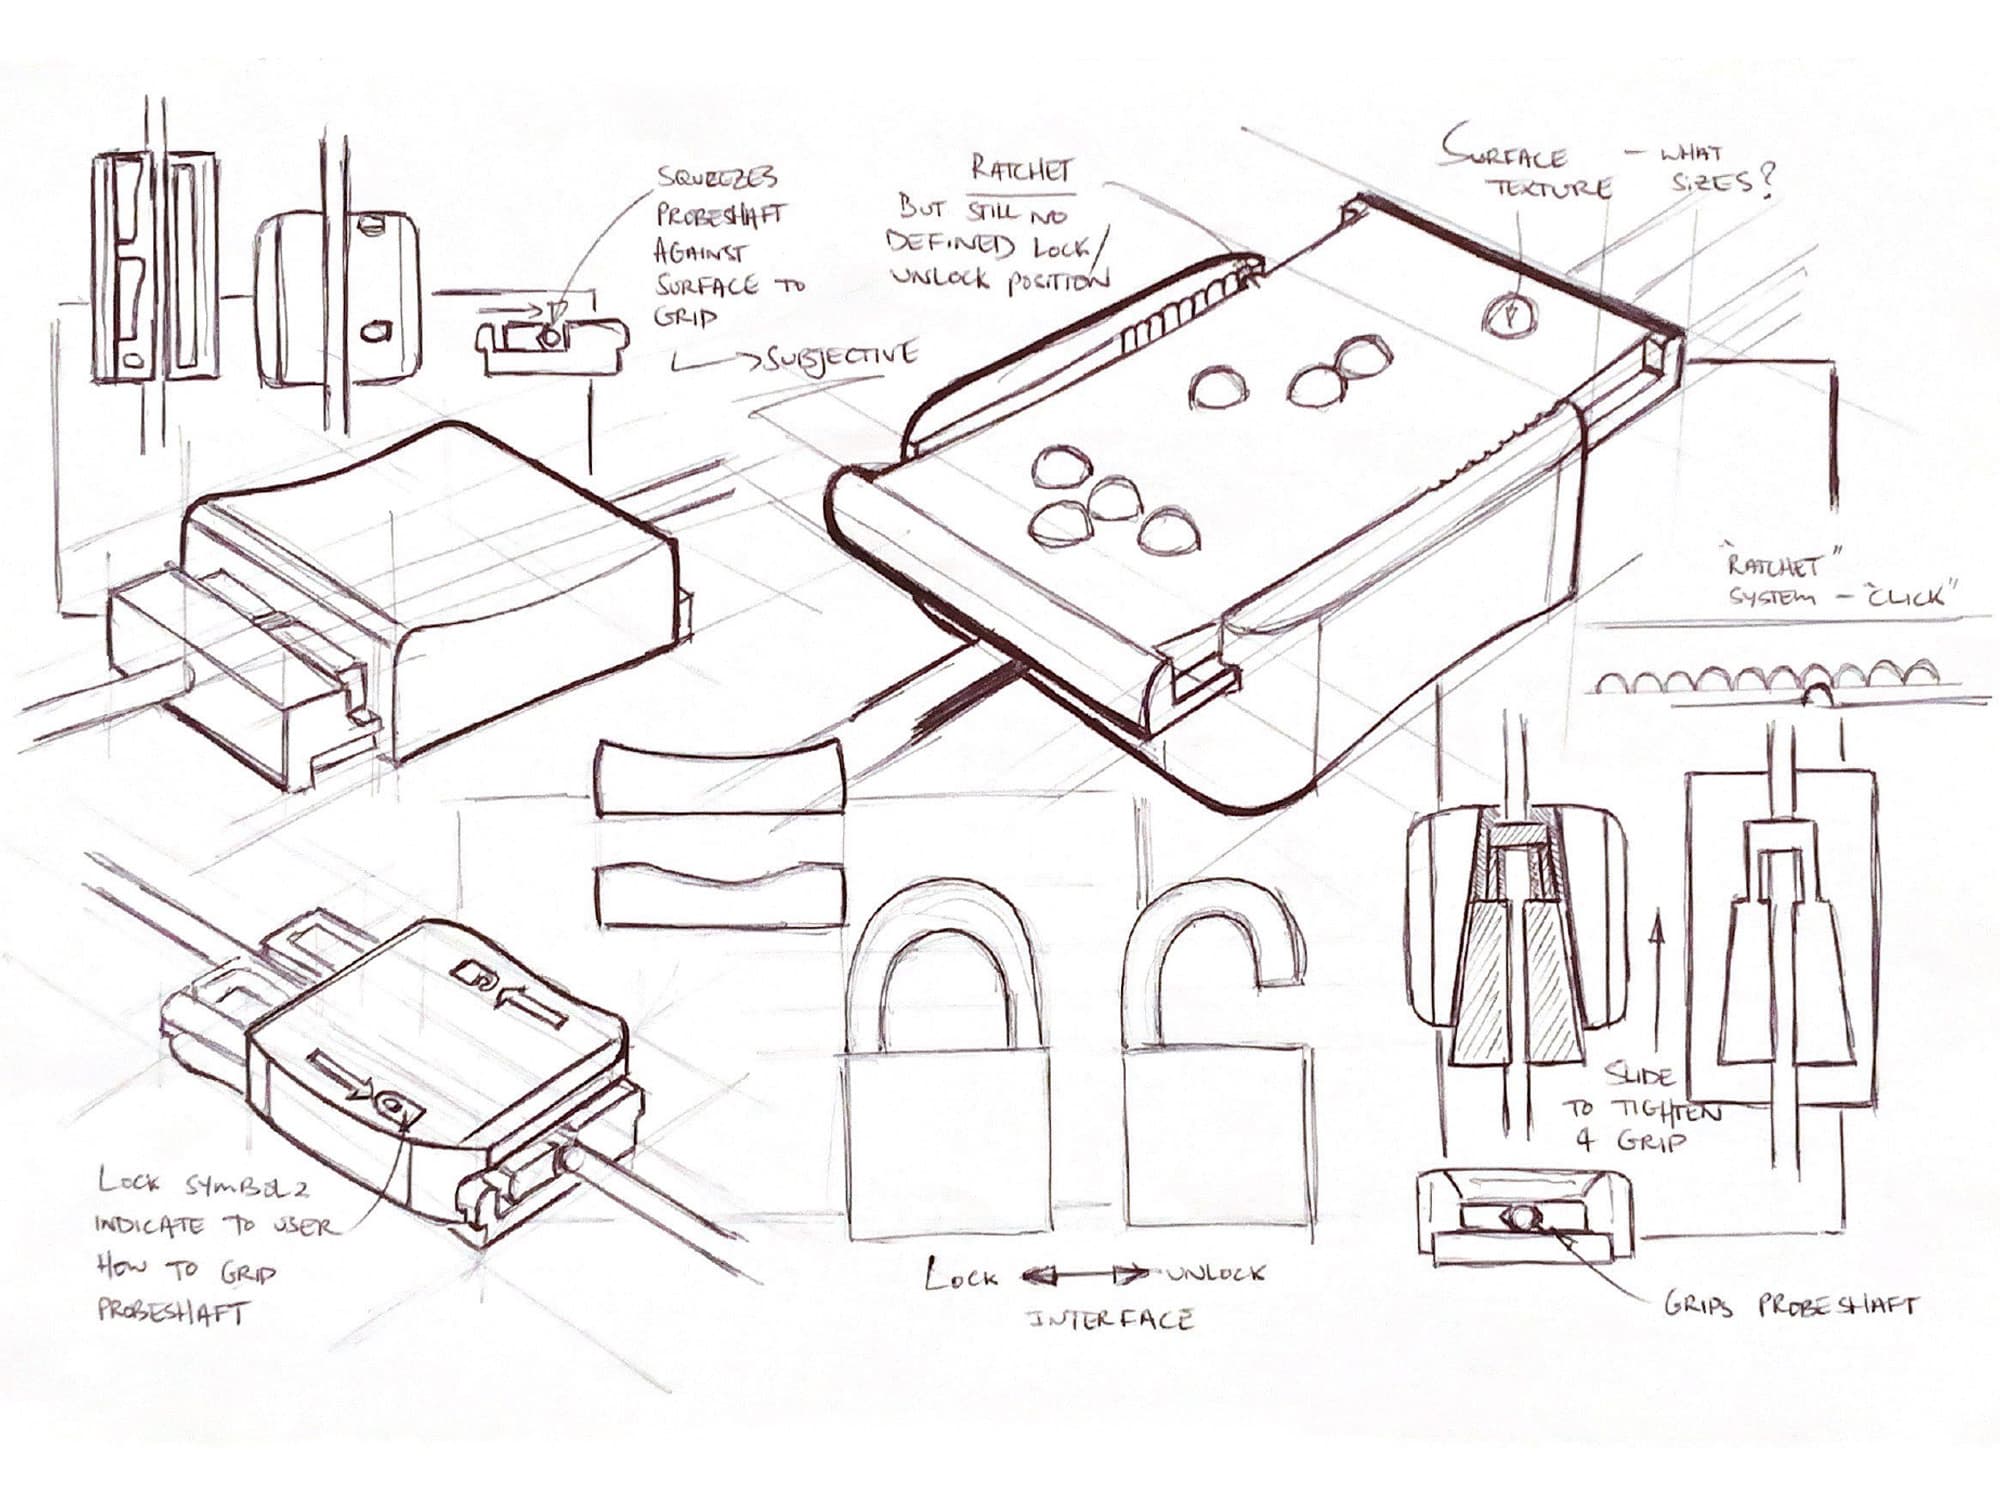 Sketches of some handle design ideas with alternative locking mechanisms.